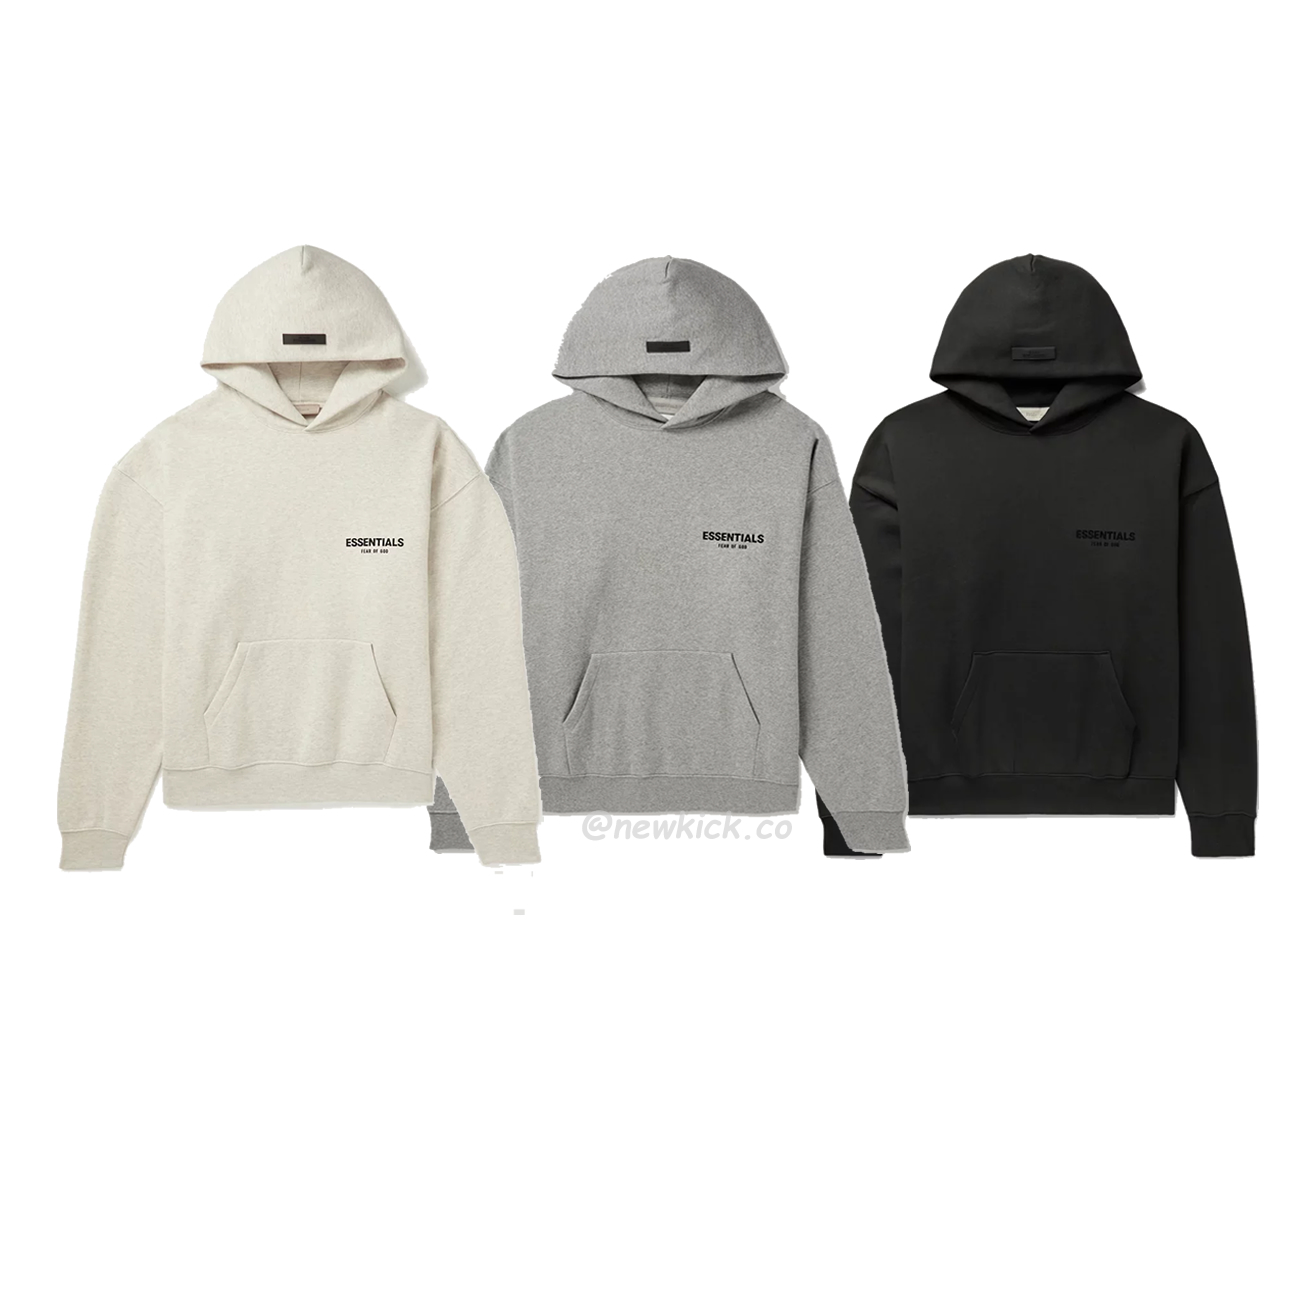 Fear Of God Essentials Core Collection Kids Pullover Hoodie Dark Heather Oatmeal (1) - newkick.org